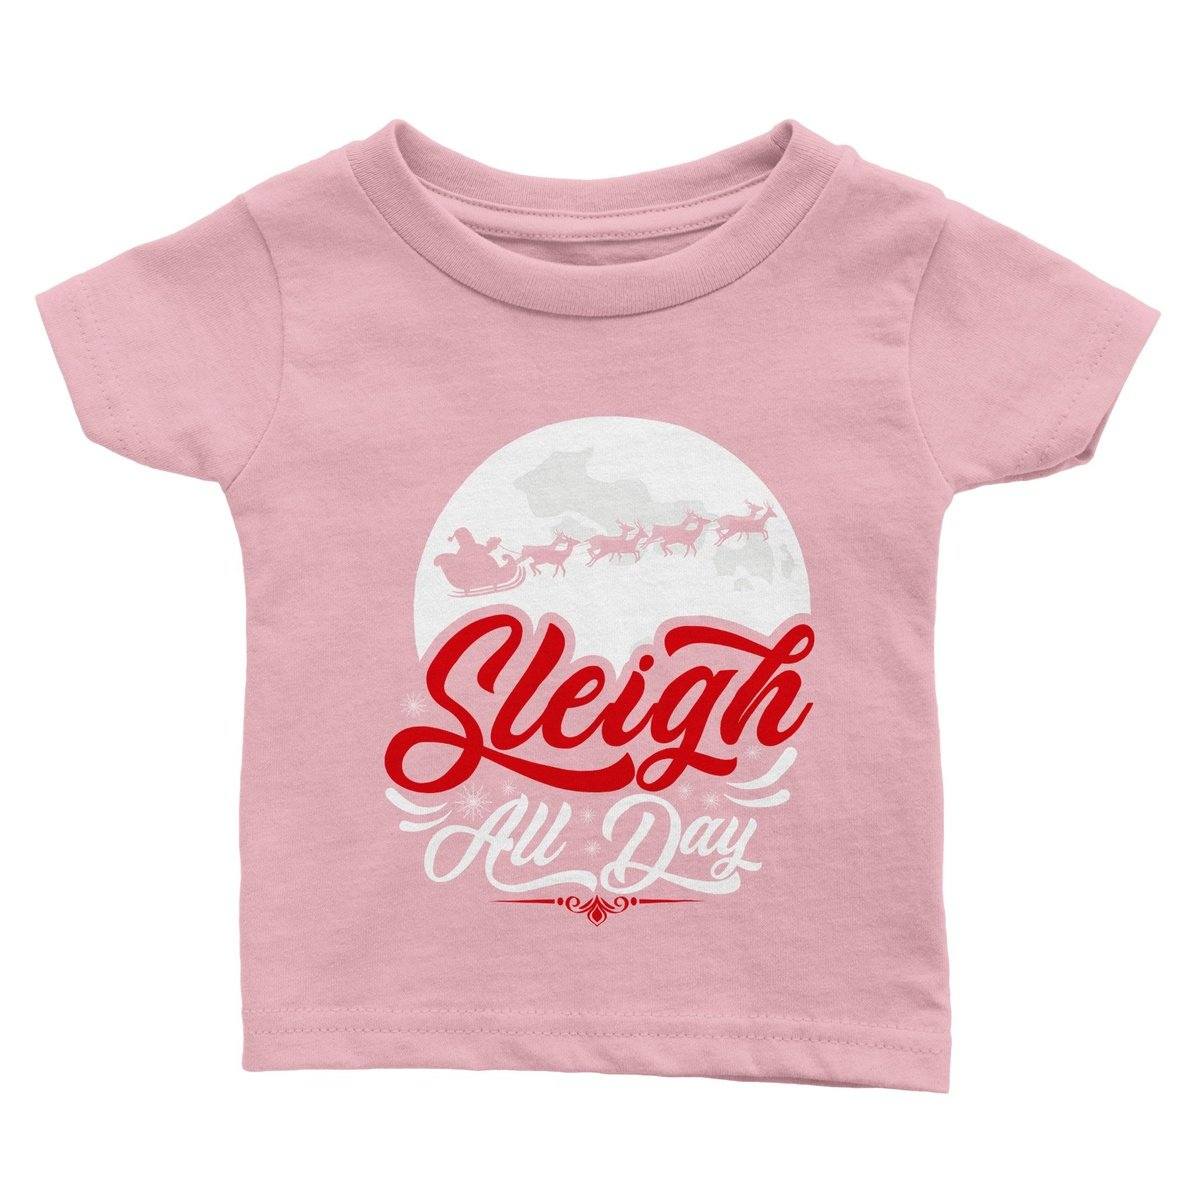 Sleigh All Day Baby T-Shirt Australia Online Color Pink / 6m